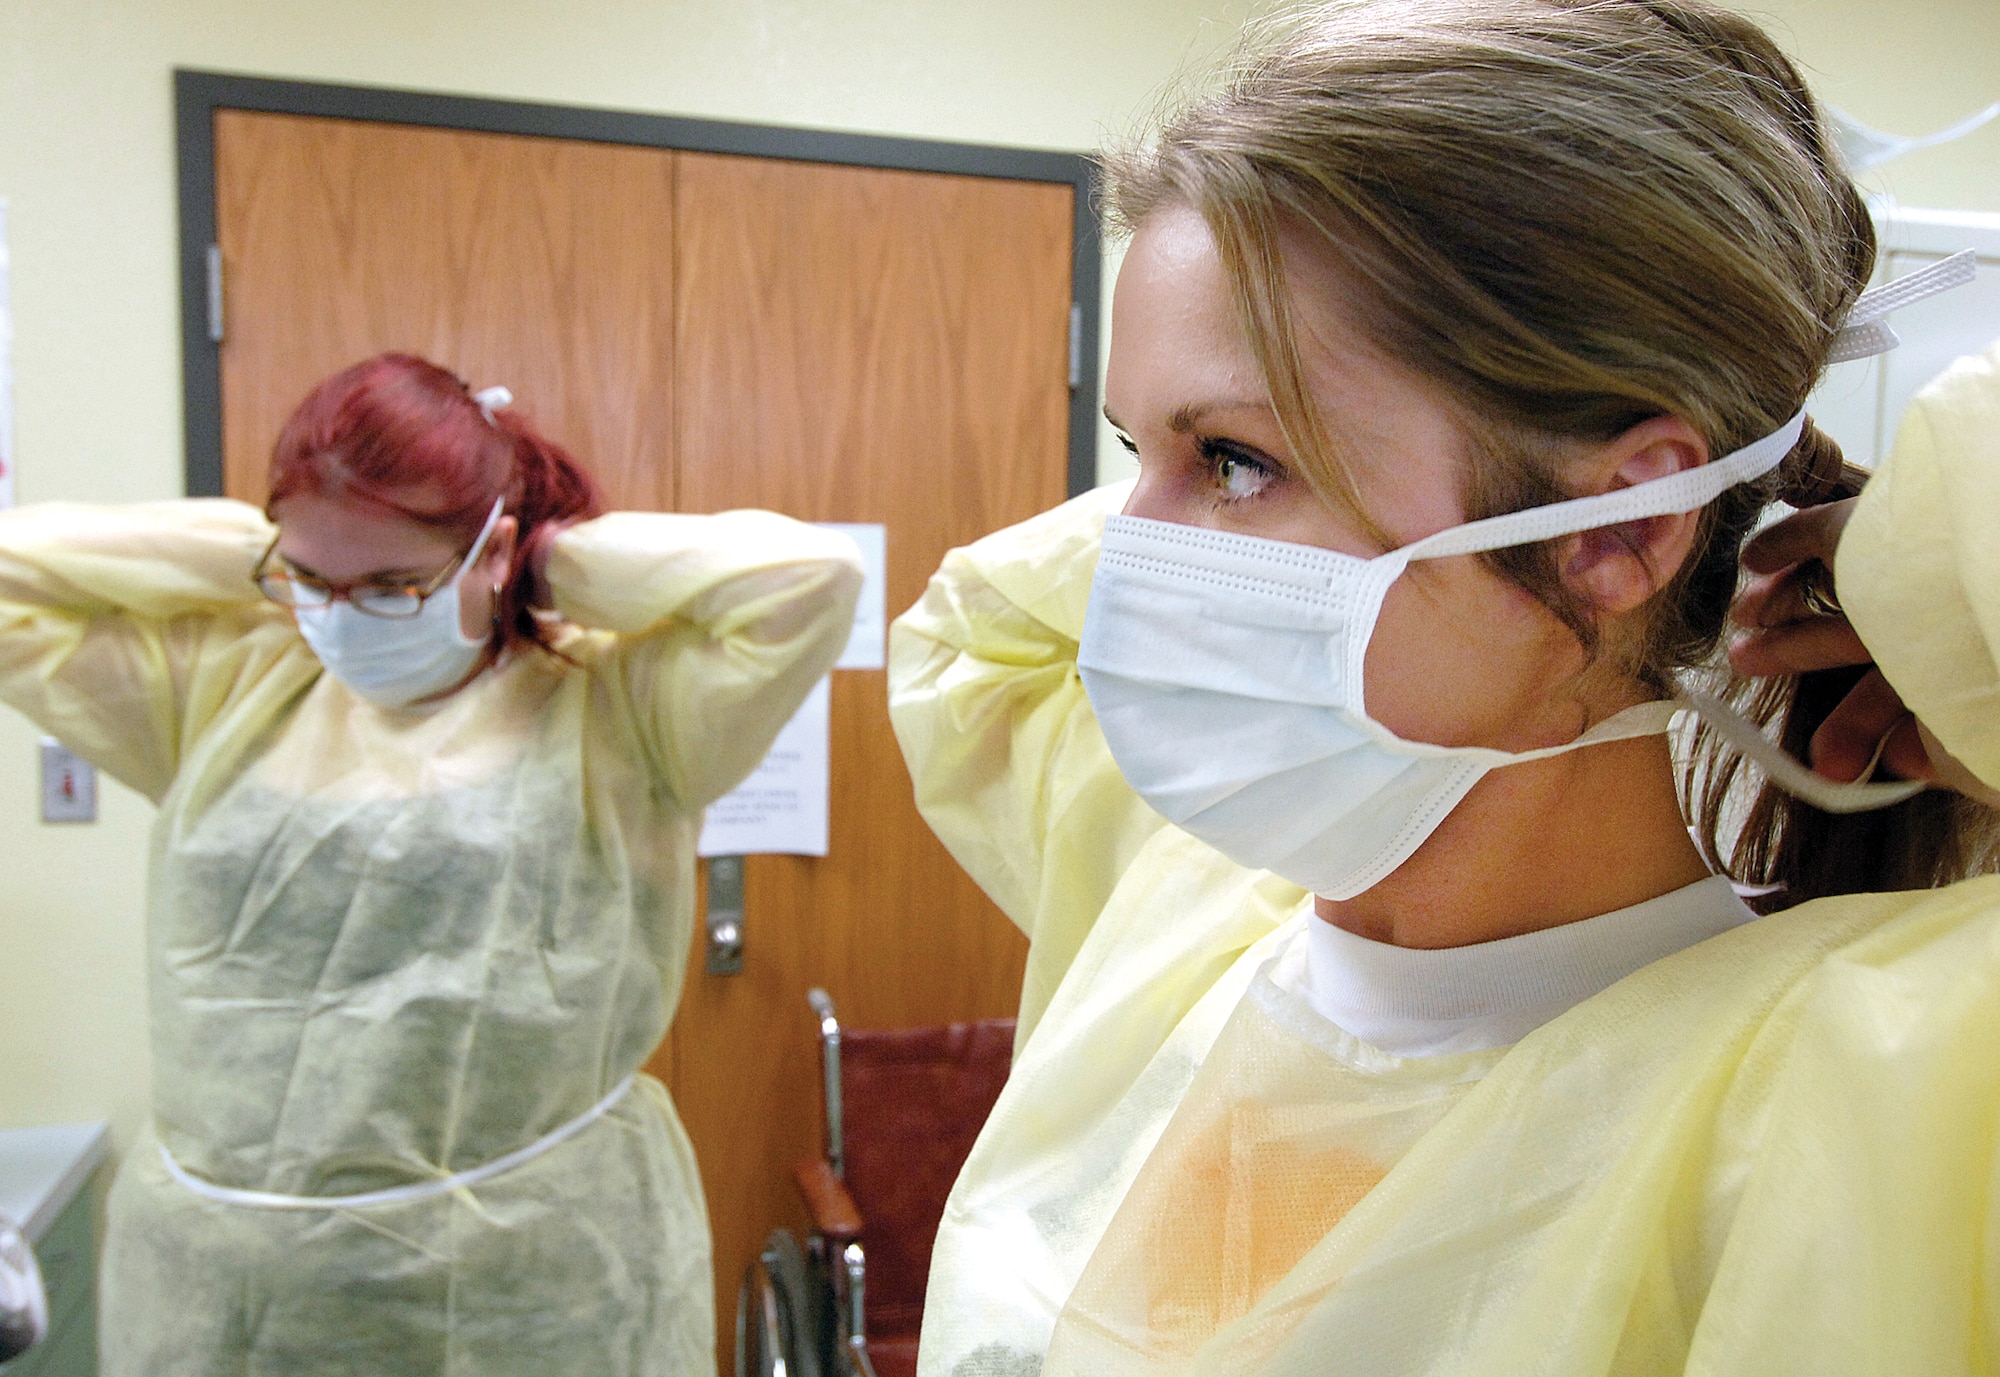 Caitlin Beaty, front, and Kelley Dzik finish dressing in personal protective clothing they might need when performing certified nursing assistant work. The women are students in a new certified nursing assistant training program at the Mid-Del Technology Center in Midwest City. The accelerated class offers portable job skills to spouses of Tinker Airmen. (Air Force photo by Margo Wright)